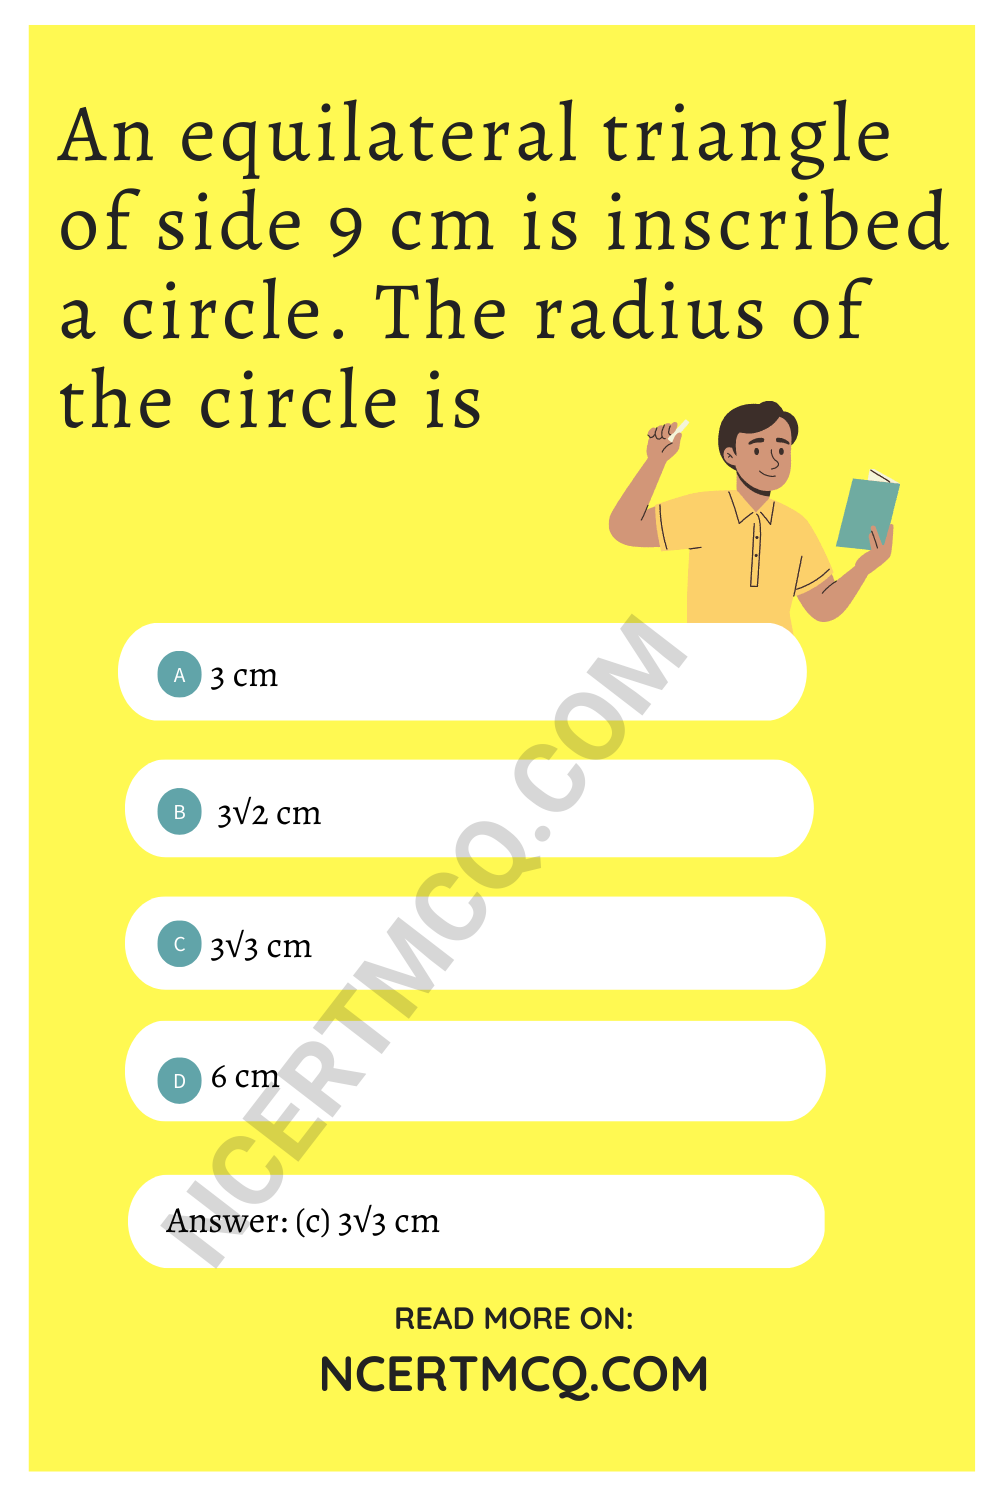 An equilateral triangle of side 9 cm is inscribed a circle. The radius of the circle is